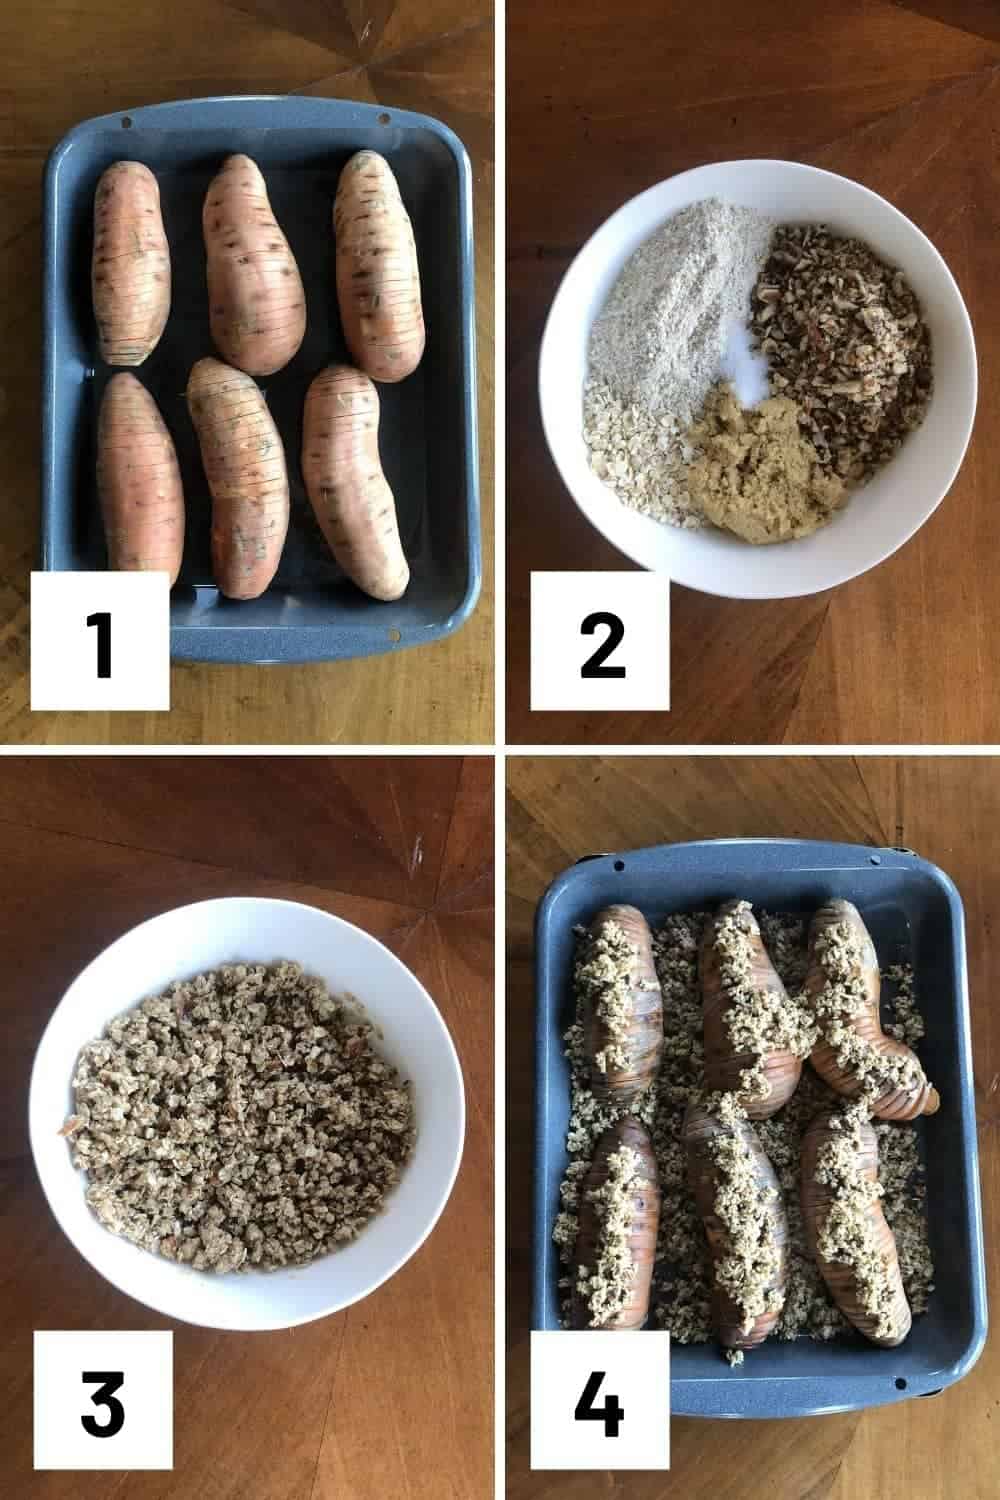 Instruction step by step photo showing sliced sweet potatoes, mixing the streusel mixture, then layering it onto the baked sweet potatoes.